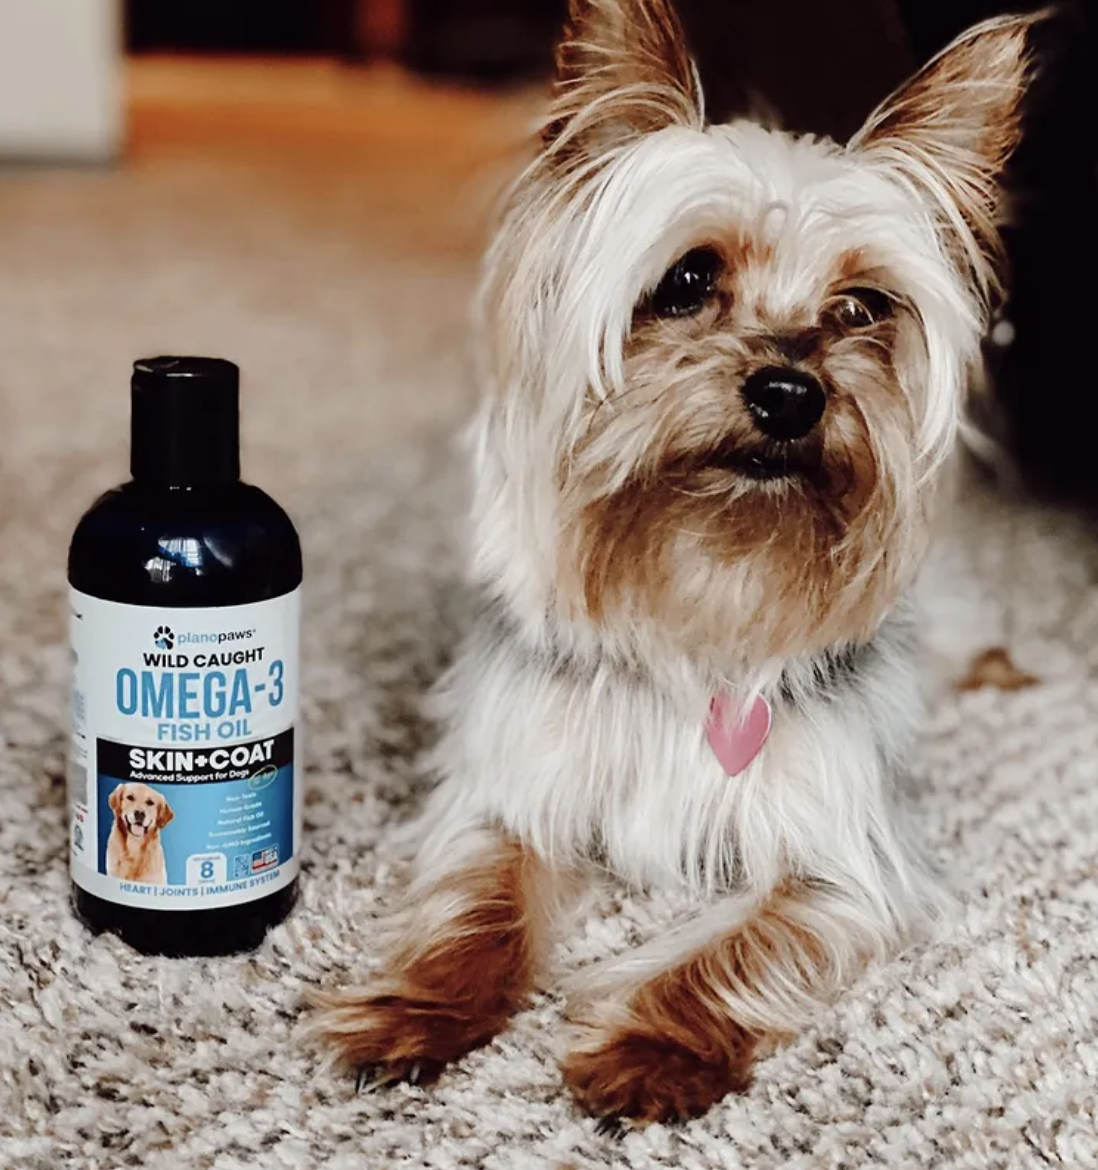 A dog laying on a carpet next to a bottle of the fish oil